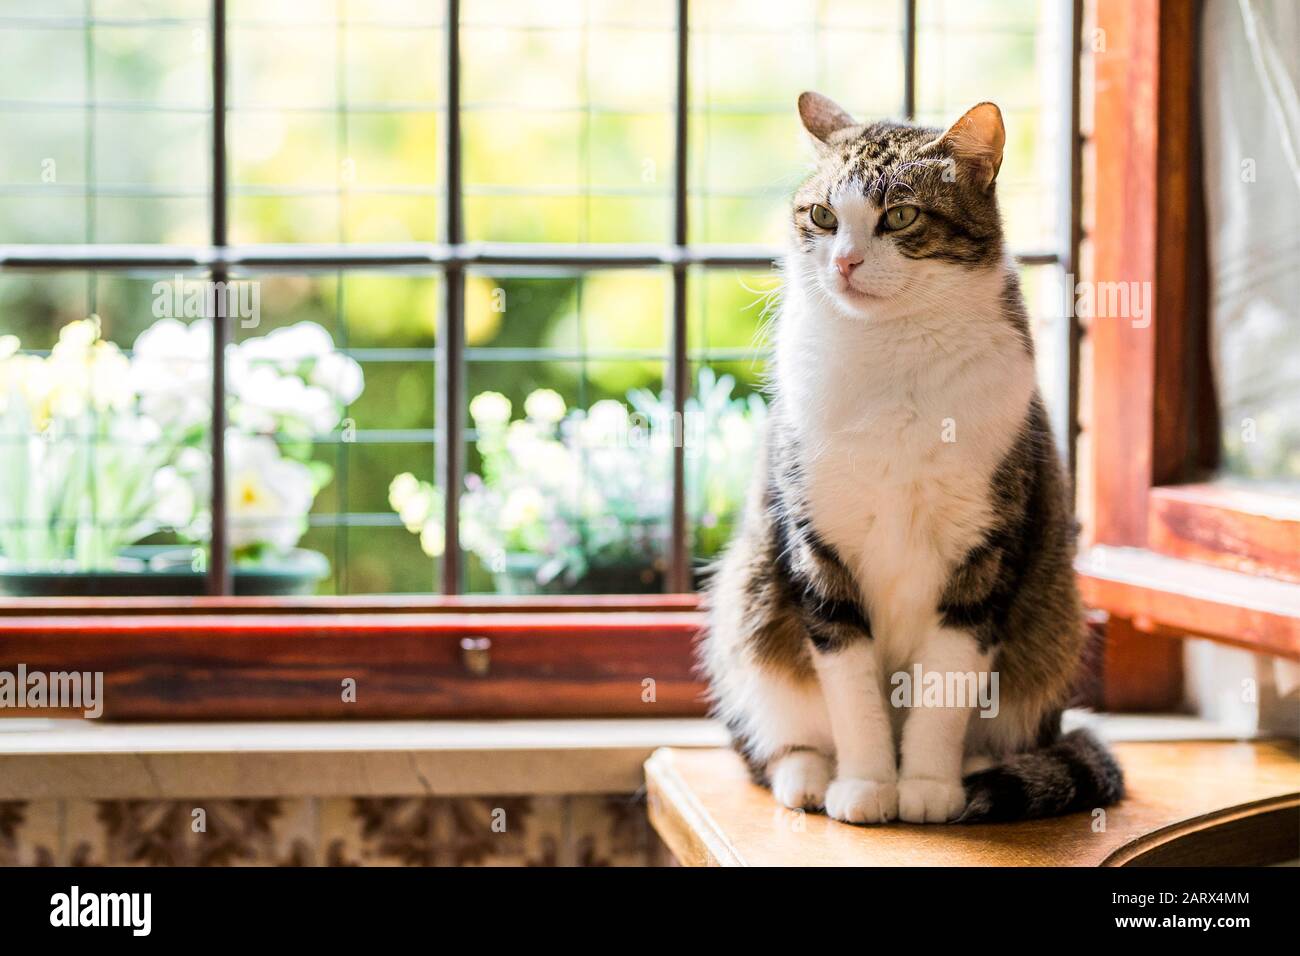 Perugia, Umbria, Italy. A beautiful cat relaxed in front of the window with the flowered garden and flowers behind it, illuminated by the sun. Stock Photo